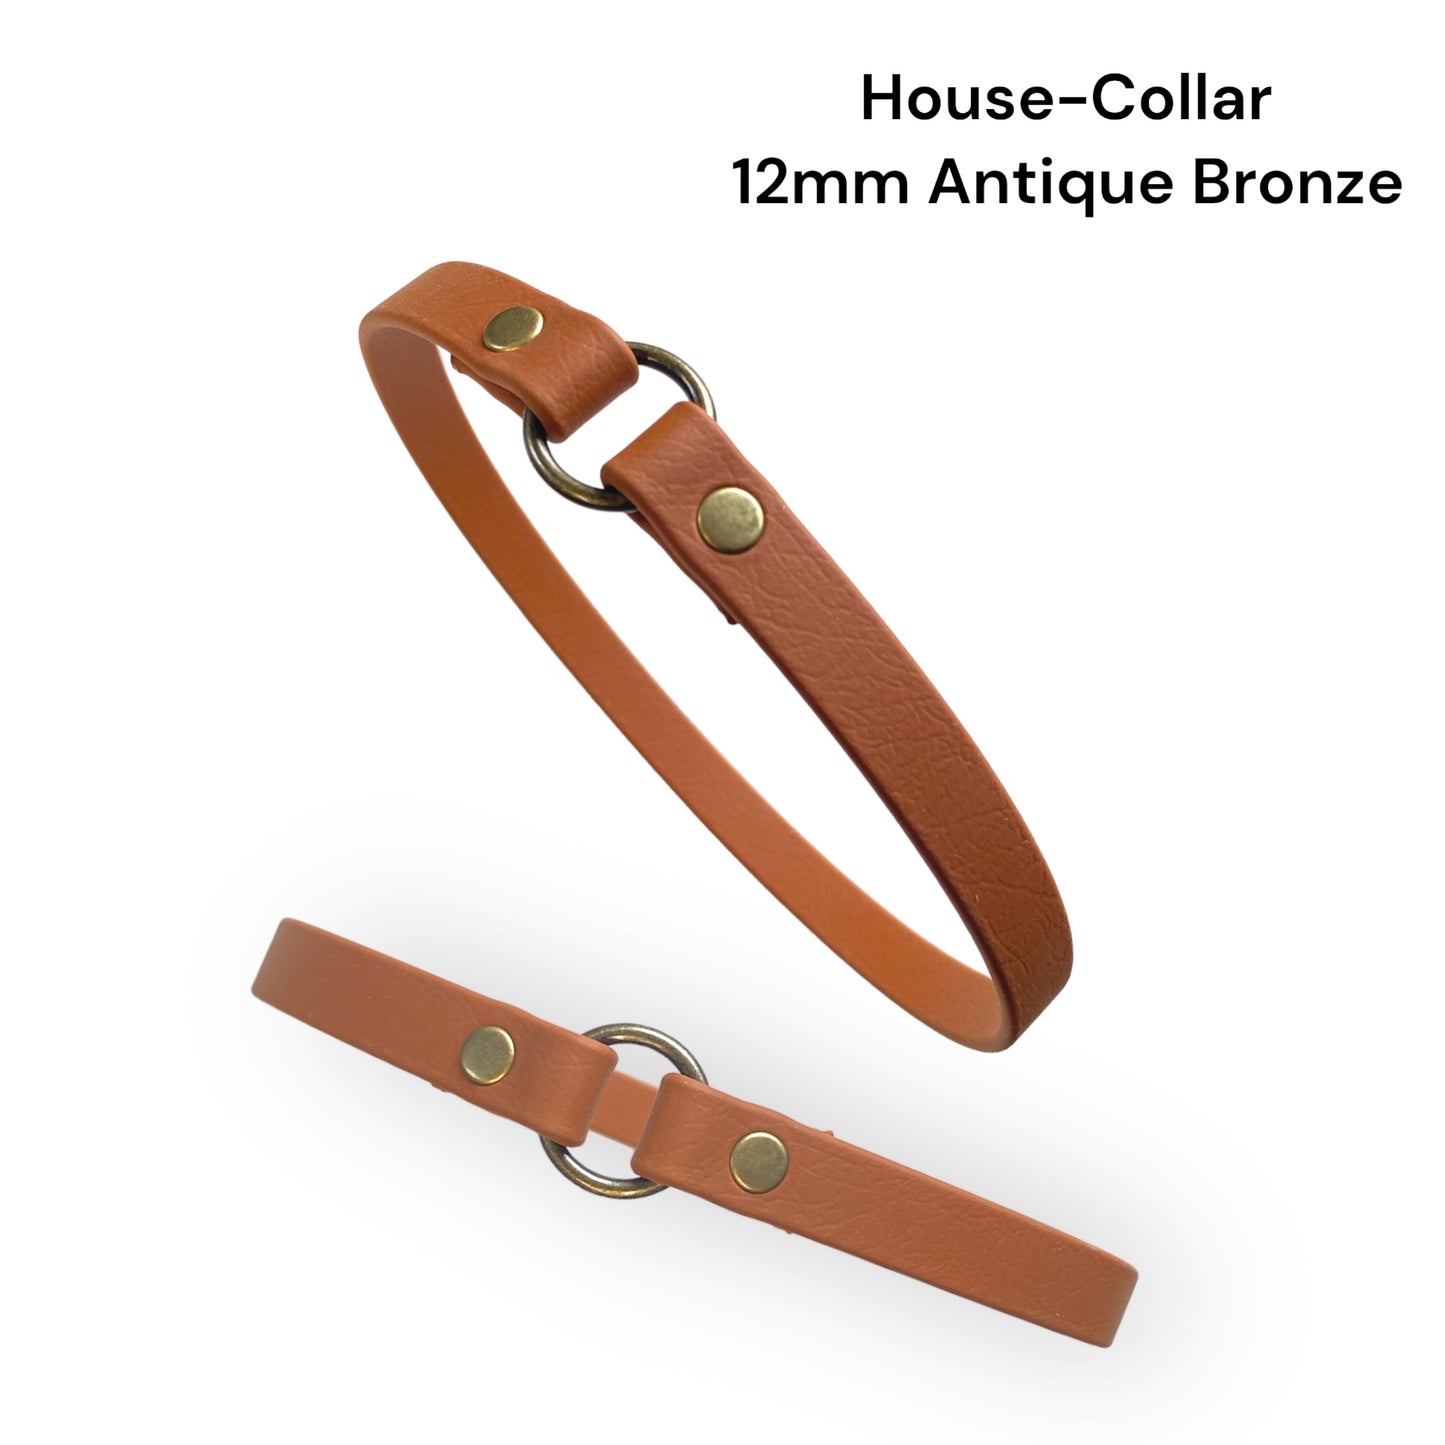 Engraved ID house collar